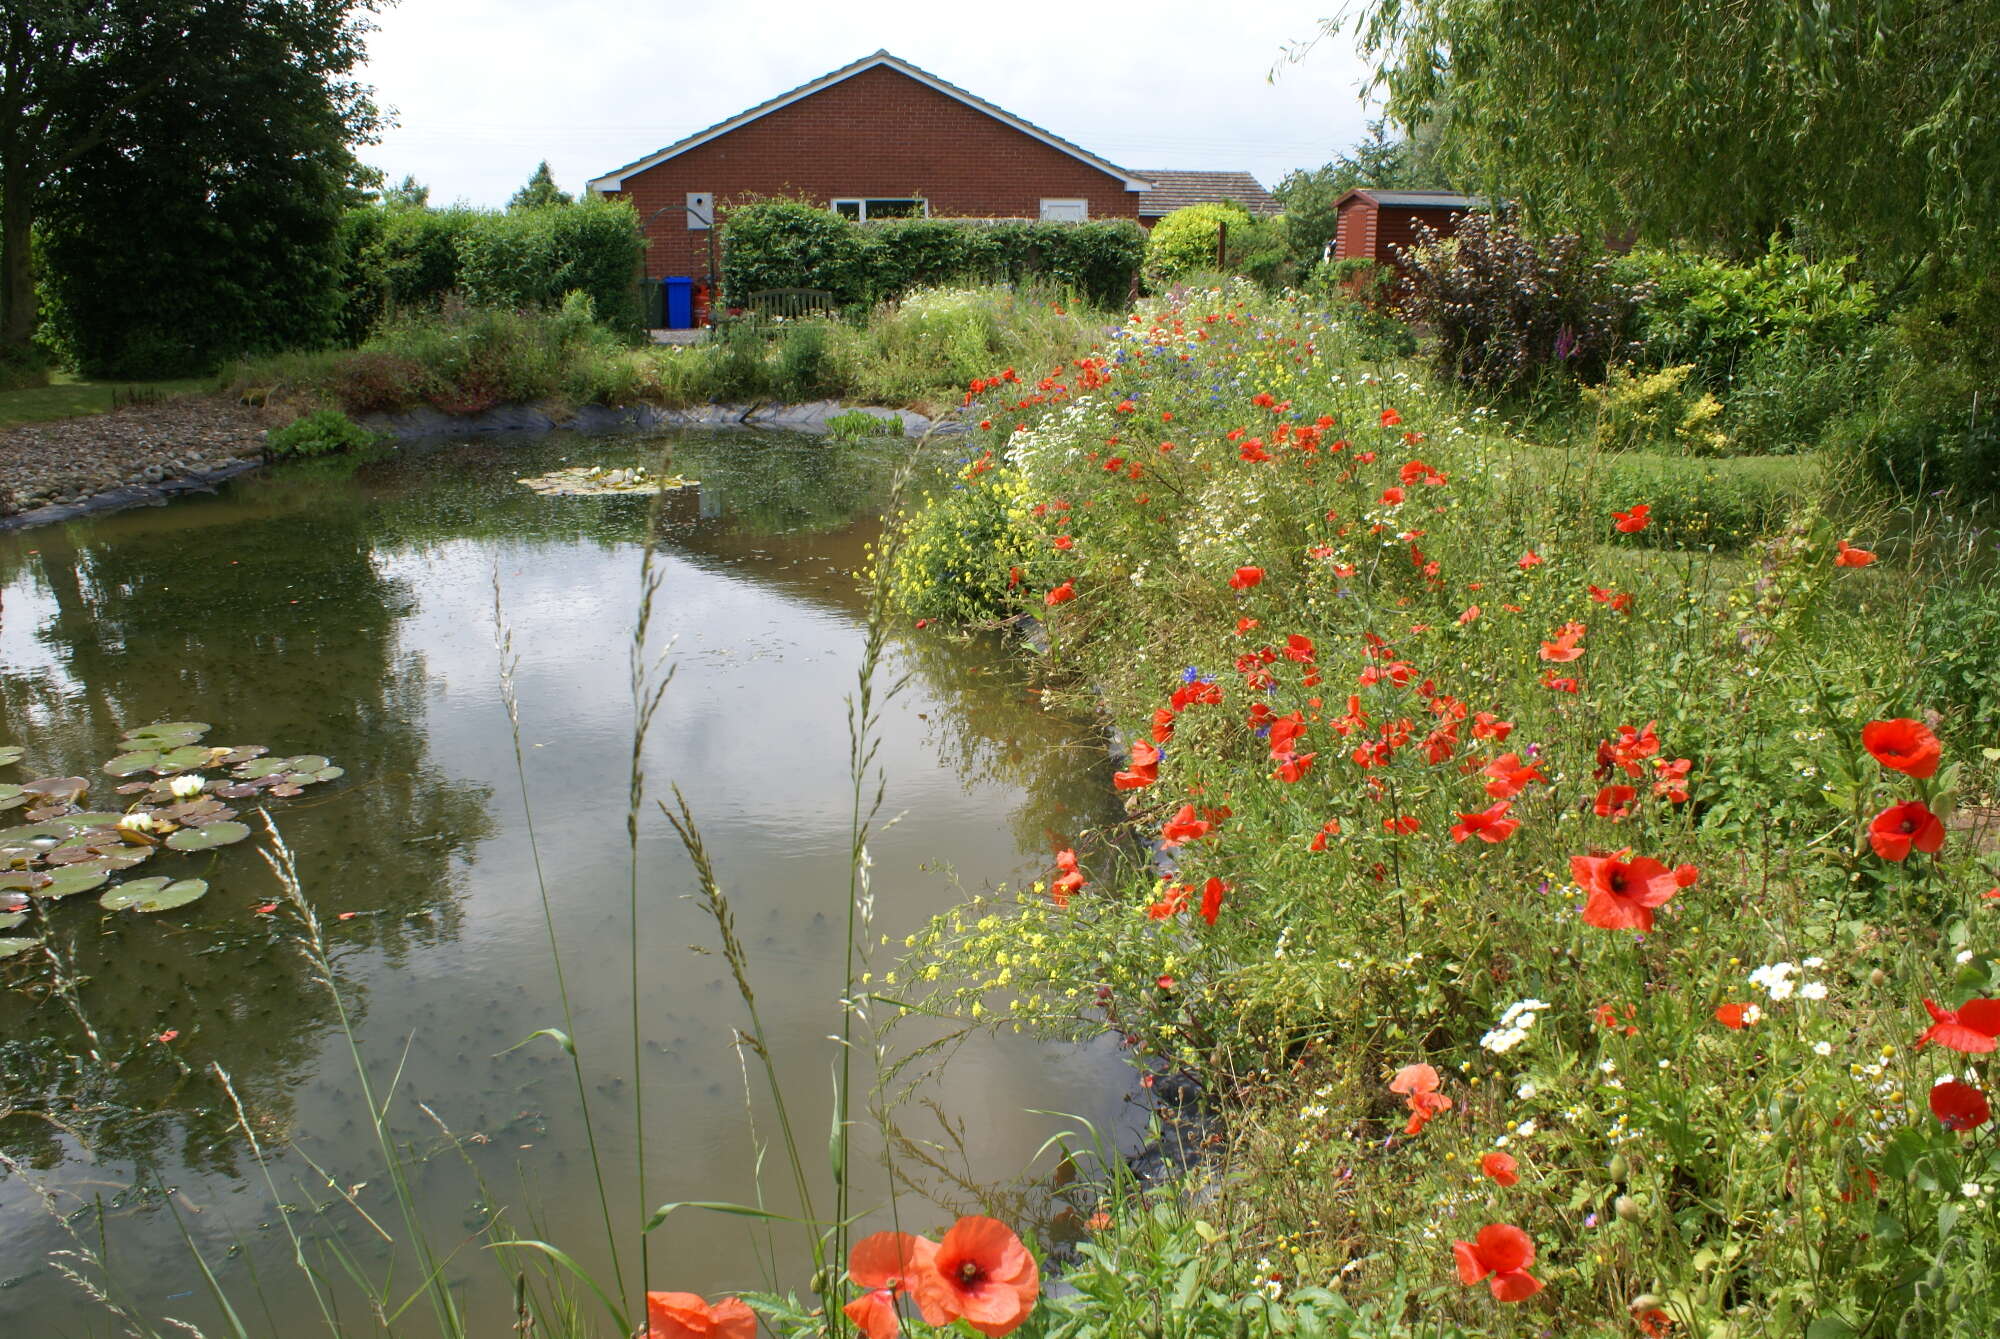 Poppies help fill the gaps around the renovated pond.